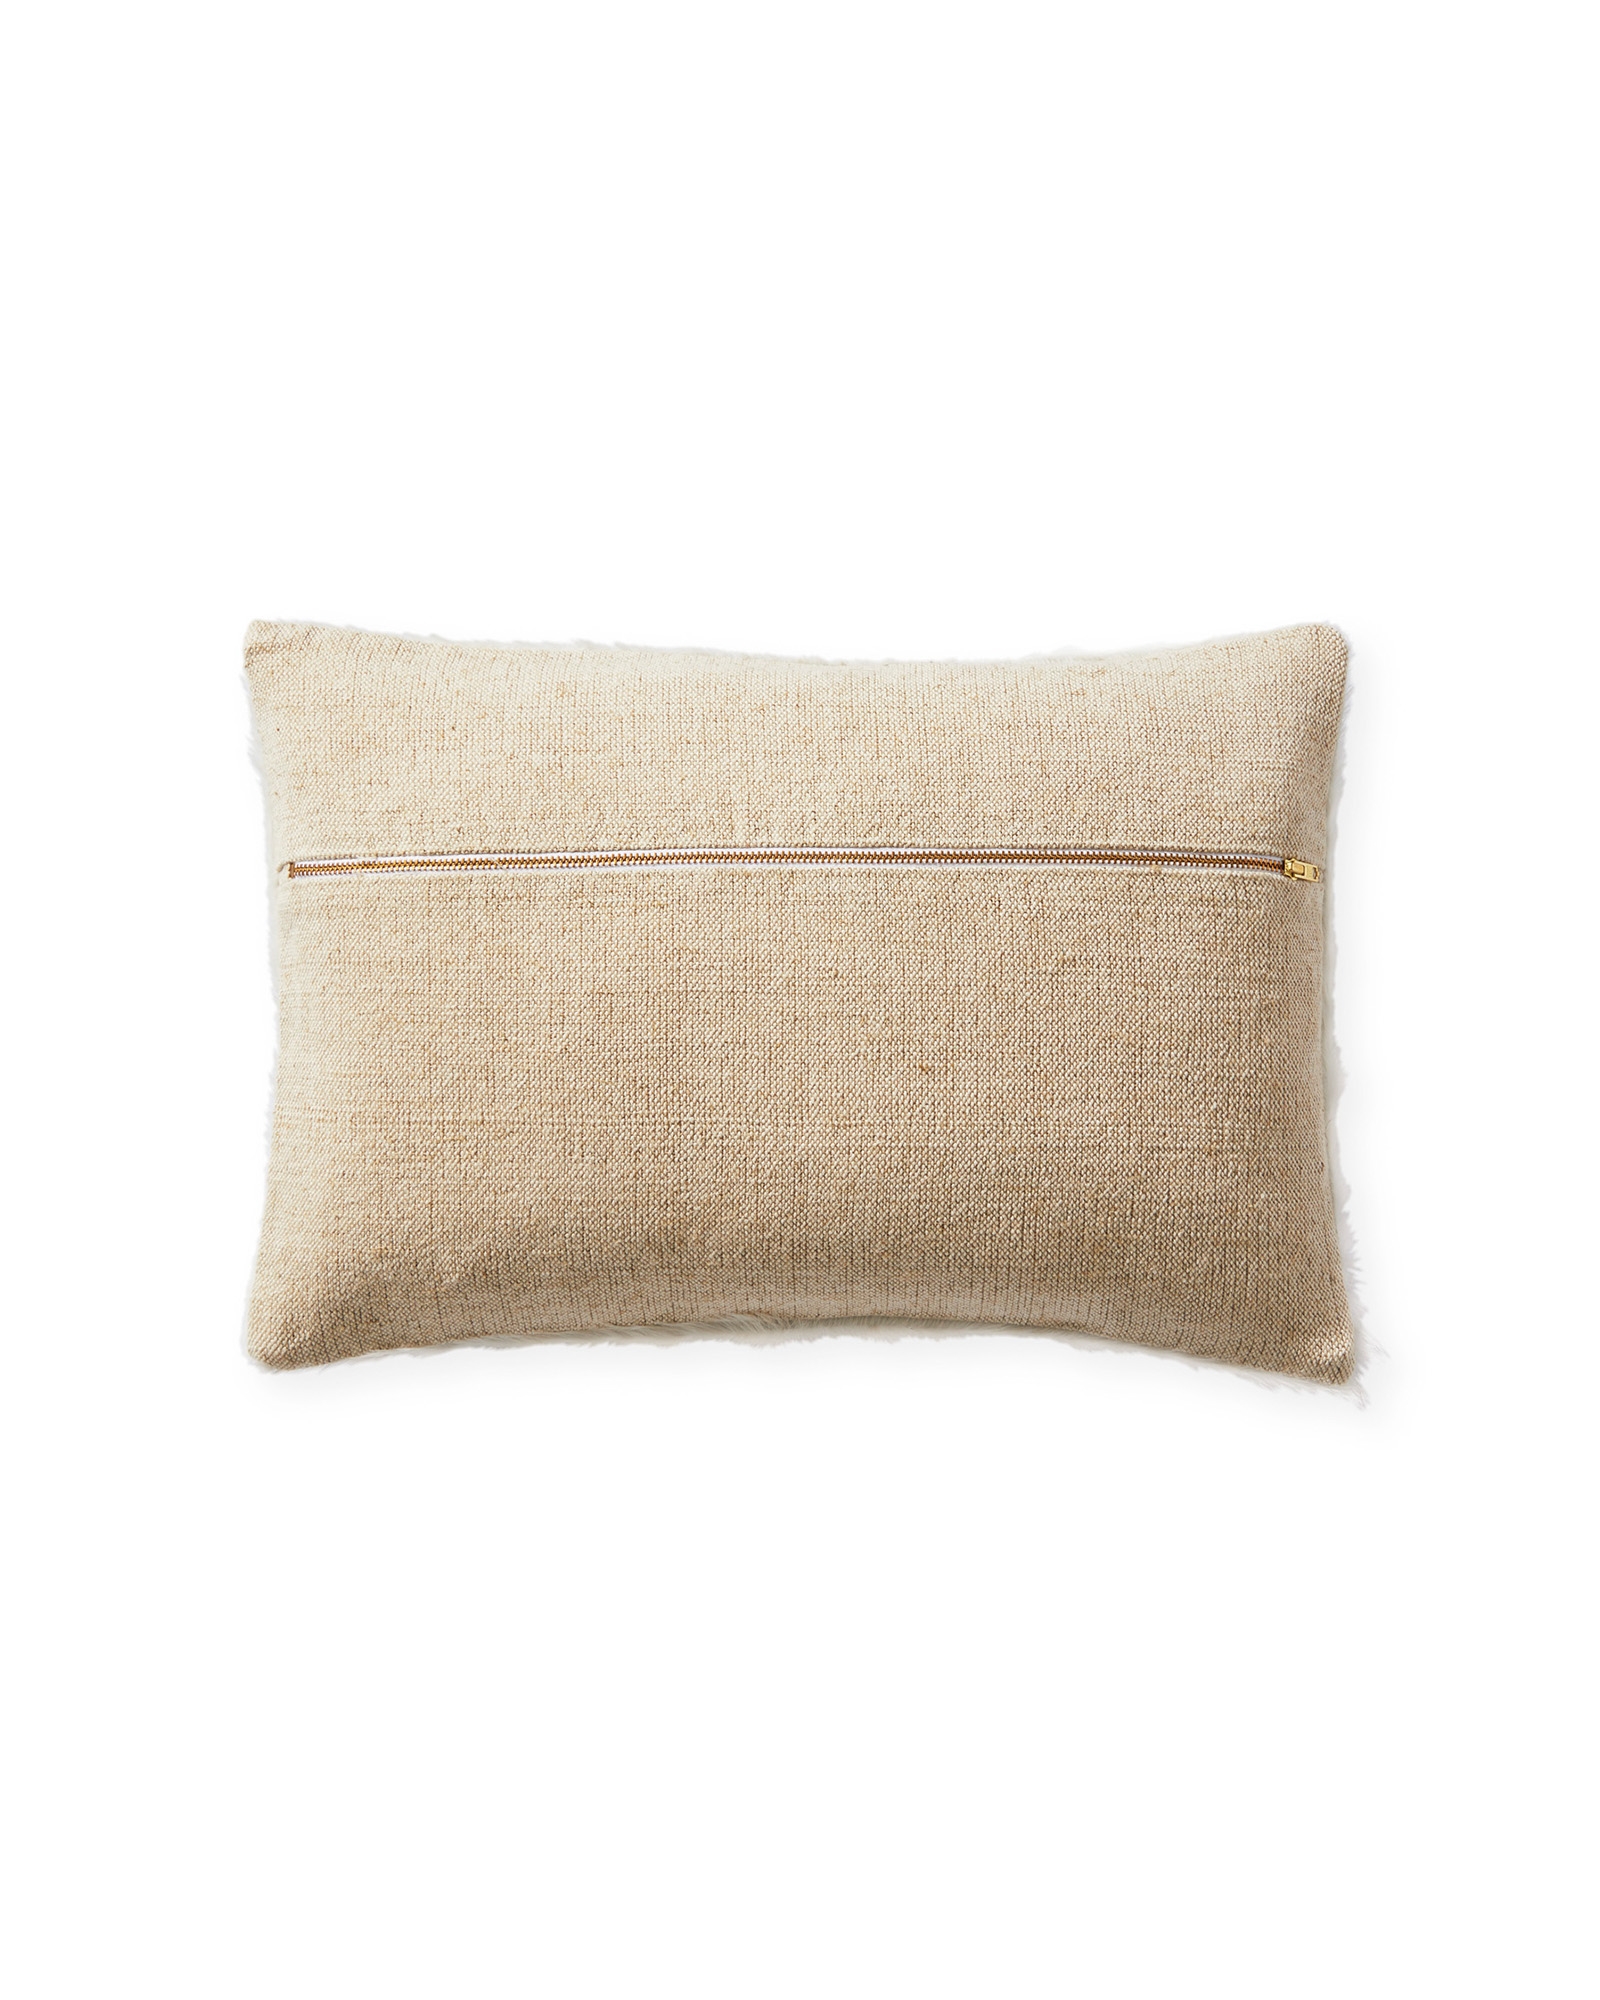 Pluma Hair on Hide Pillow Cover - 12" x 18" - Insert sold separately - Image 1